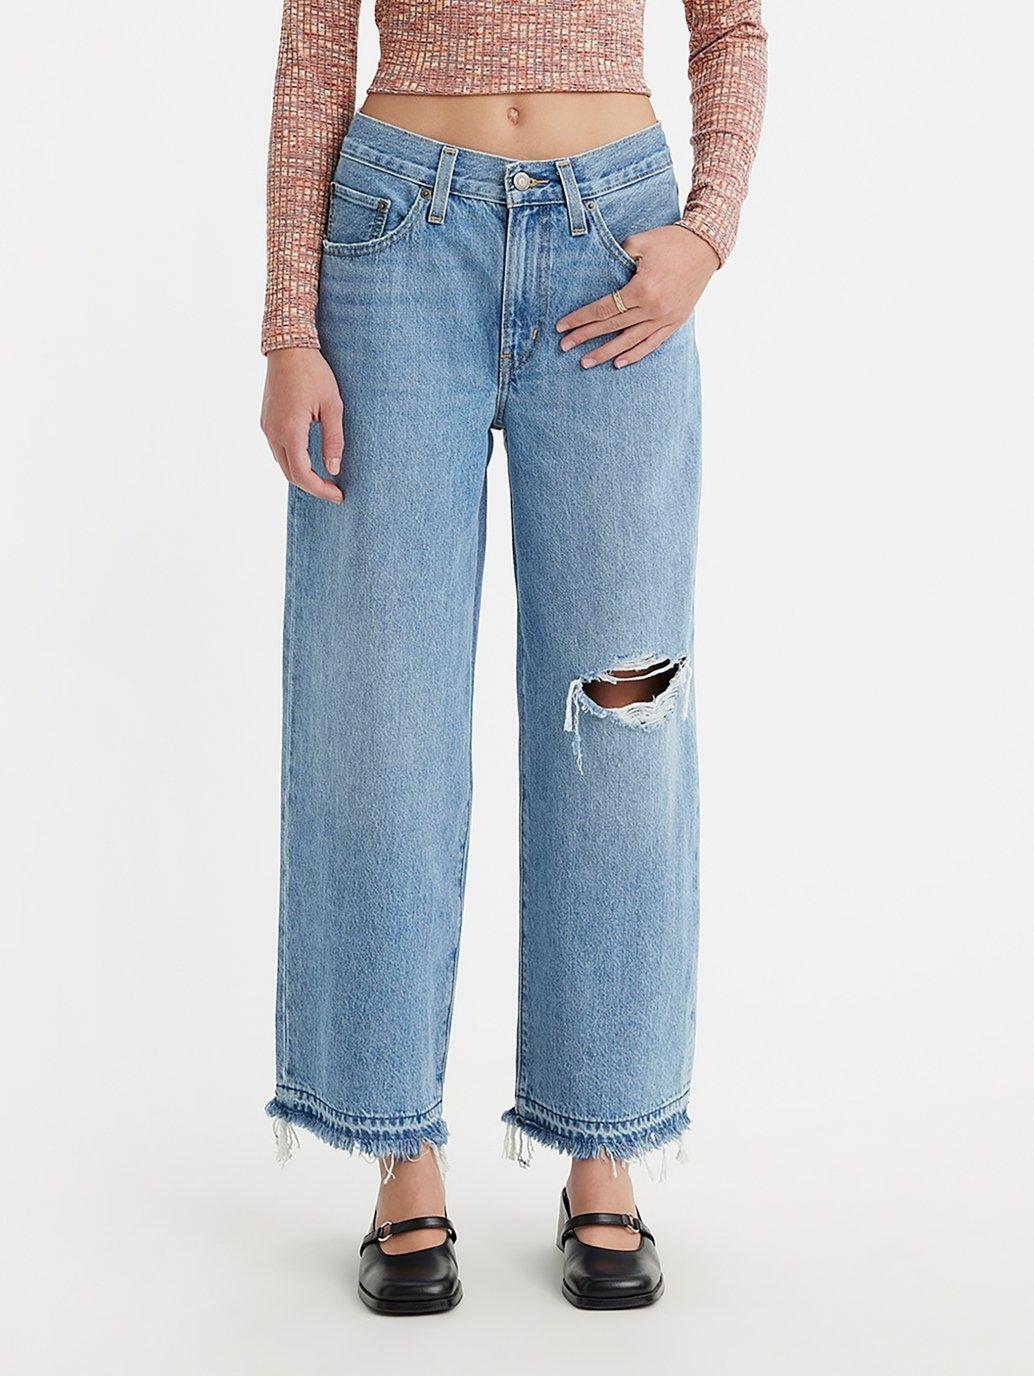 Buy Levi's® Women's Baggy High Water Jeans | Levi's® Official Online Store  SG